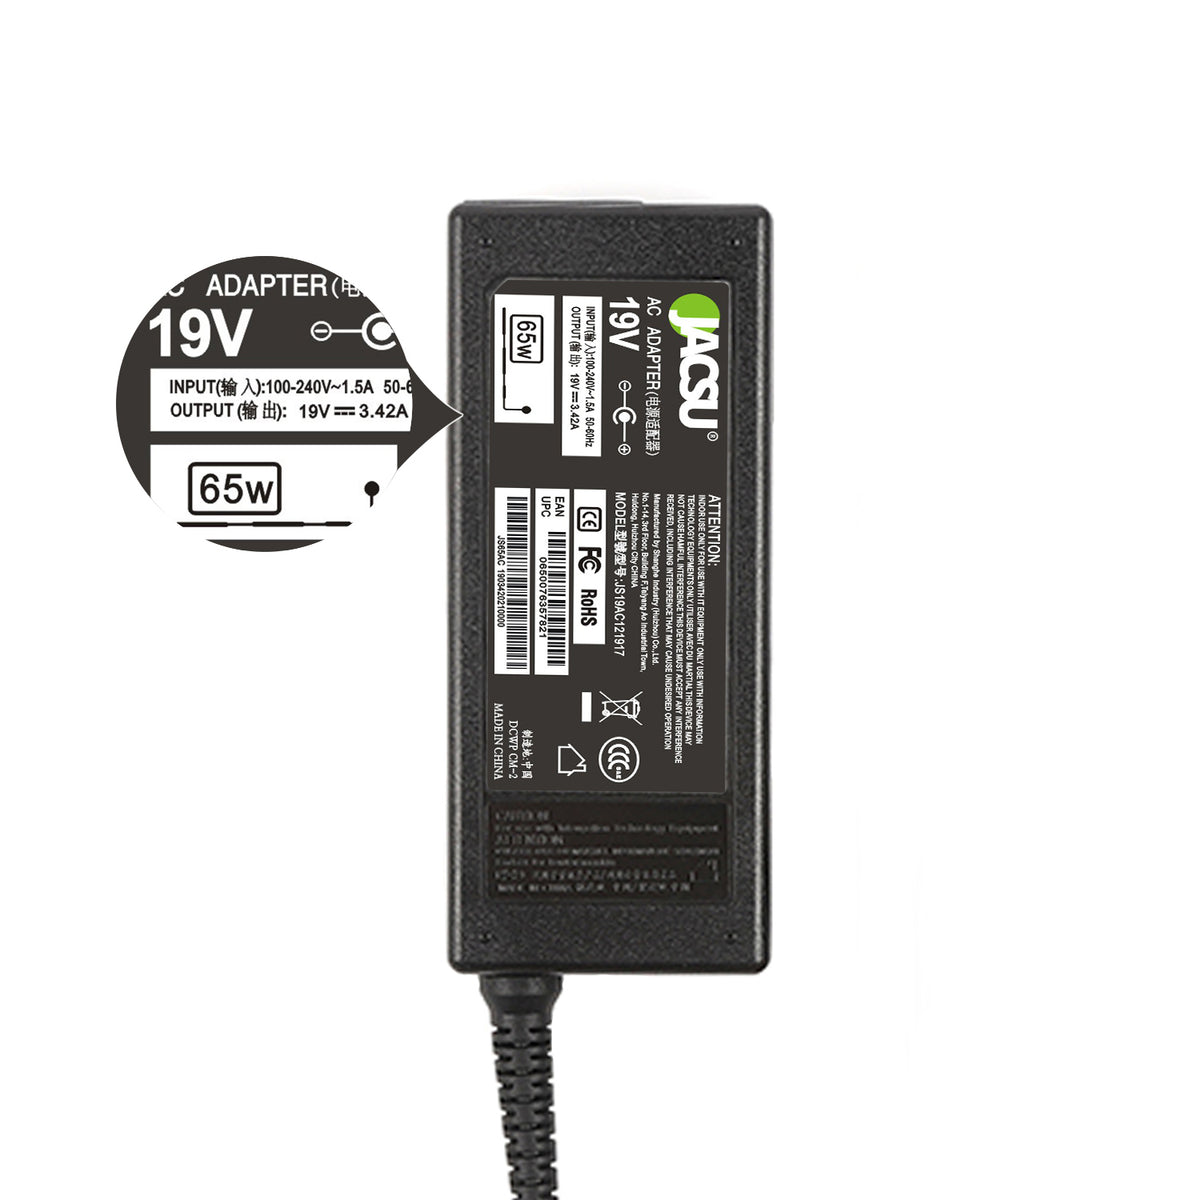 Jacsu 19V 3.42A 65W Pin Size 5.5x1.7 Laptop Power Adapter Charger For Acer A11-065N1A ADP-65VH B /ADP-65 PA-1650 1700-02 B